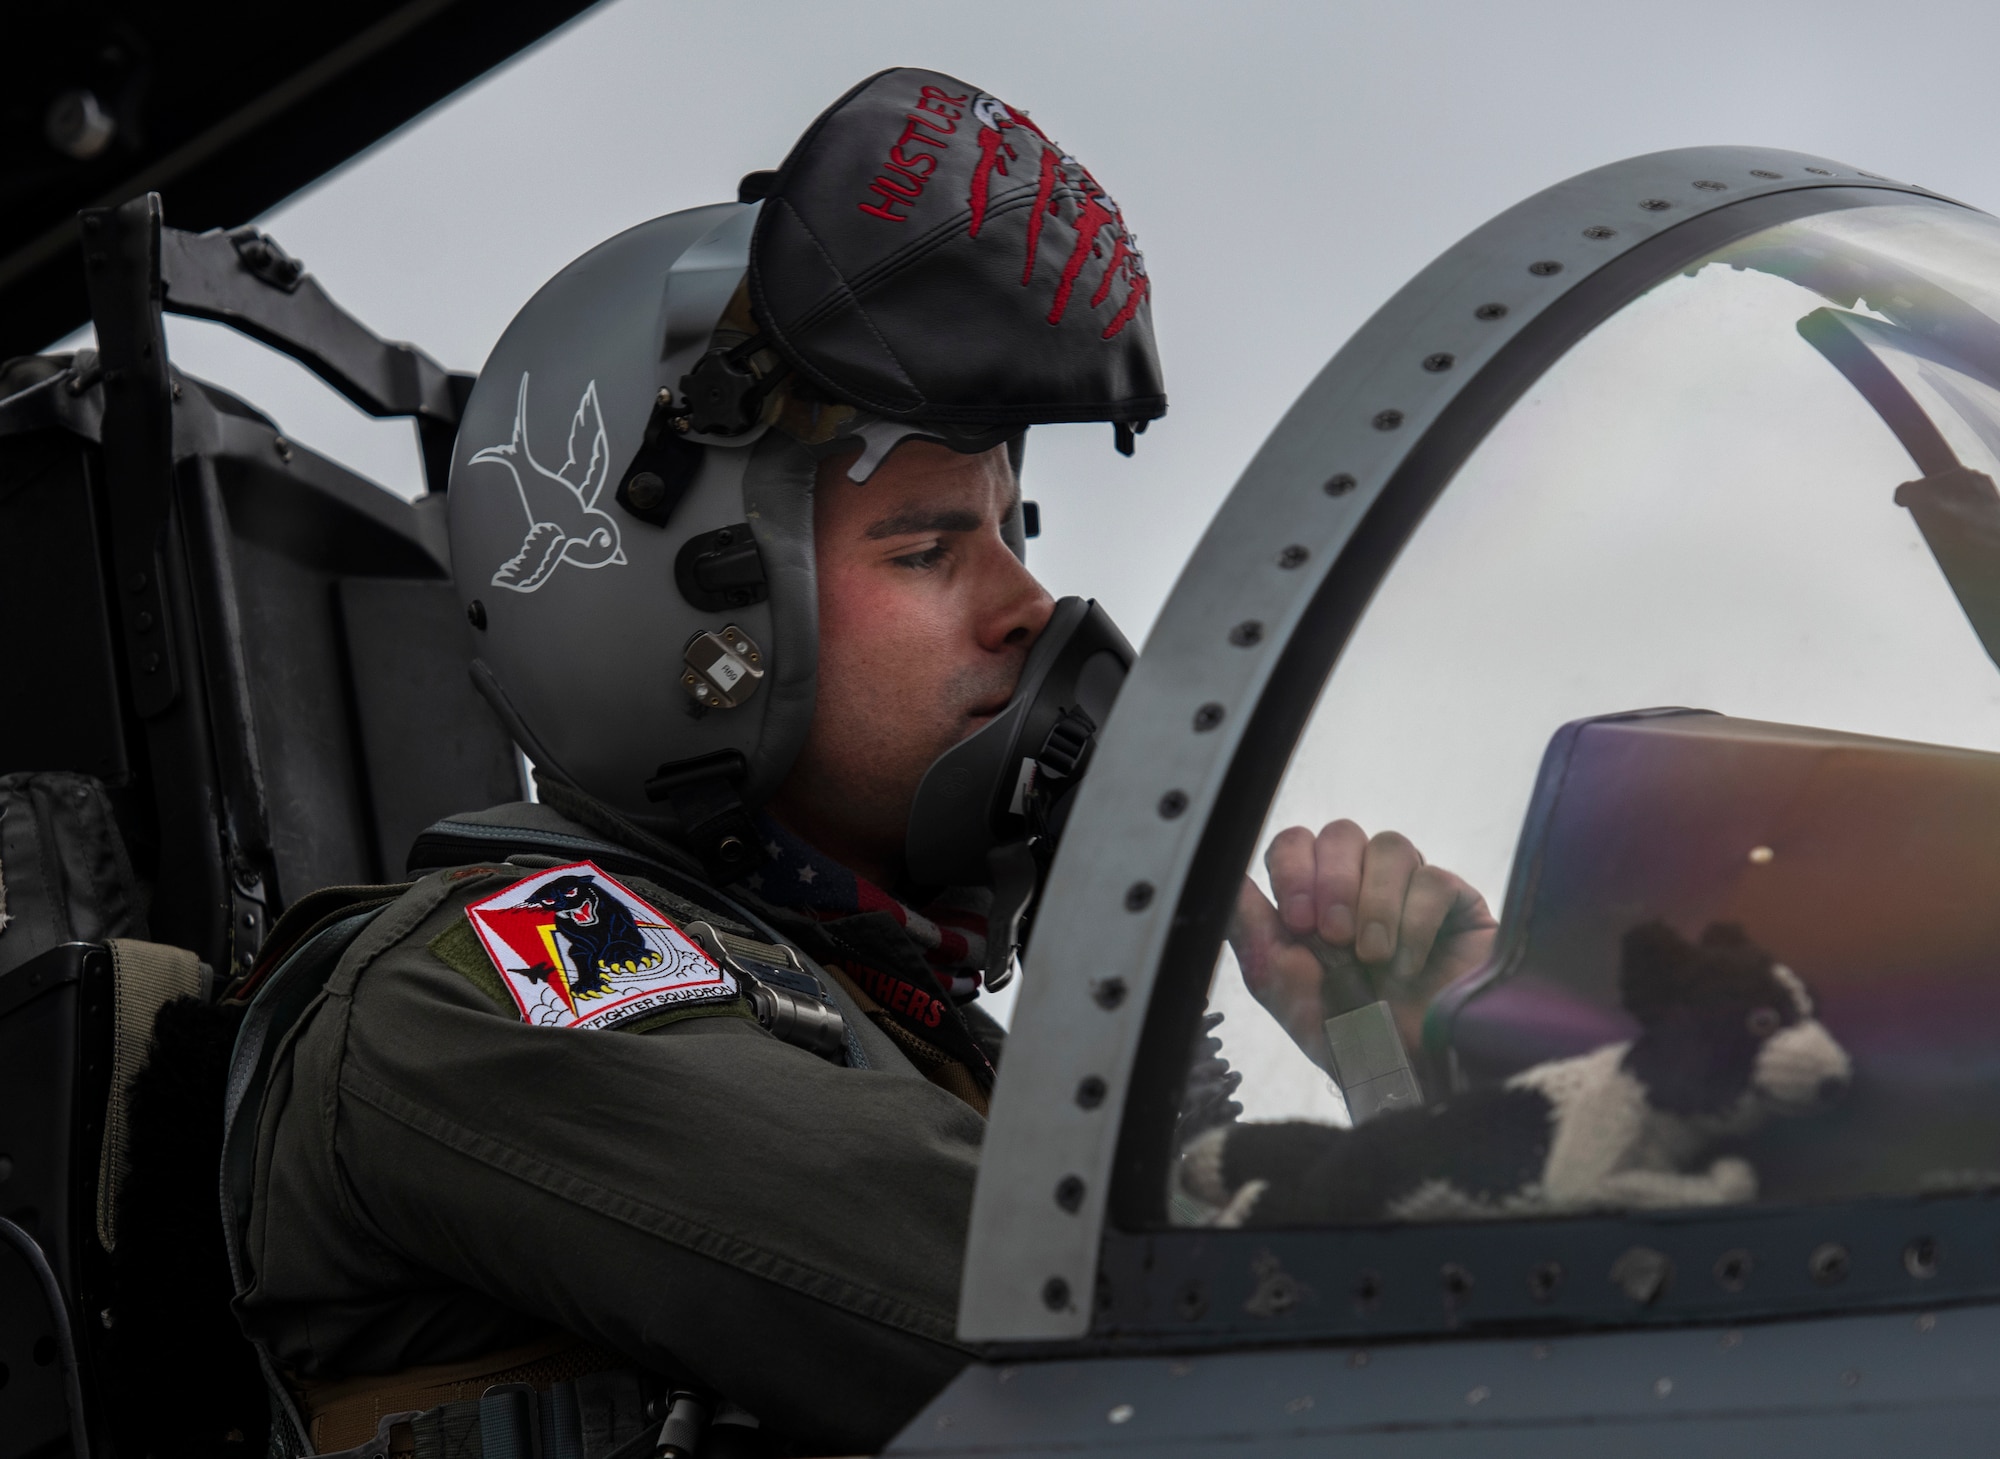 A U.S. Air Force pilot assigned to the 494th Fighter Squadron prepares to depart Royal Air Force Lakenheath, England, to Aalborg Air Base, Denmark, Oct. 30, 2020. Agile combat employment within the Baltic airspace and surrounding nations is key to regional defense and stability. Collective training events enhance the ability of NATO forces to work together effectively to fight from varying locations and respond to any threats. (U.S. Air Force photo by Airman 1st Class Jessi Monte)